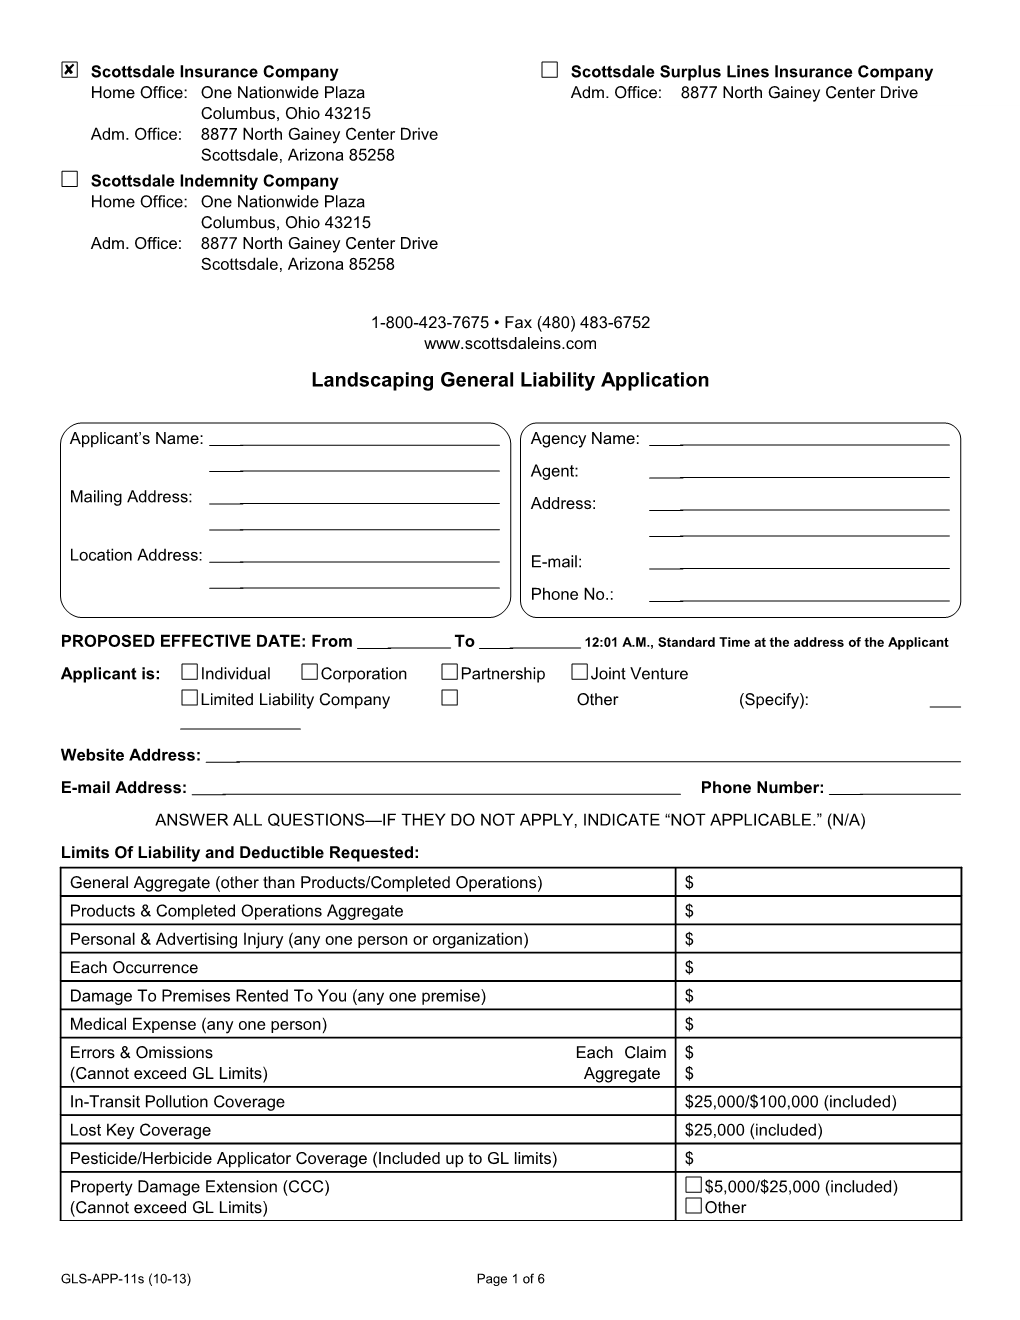 Landscaping General Liability Application